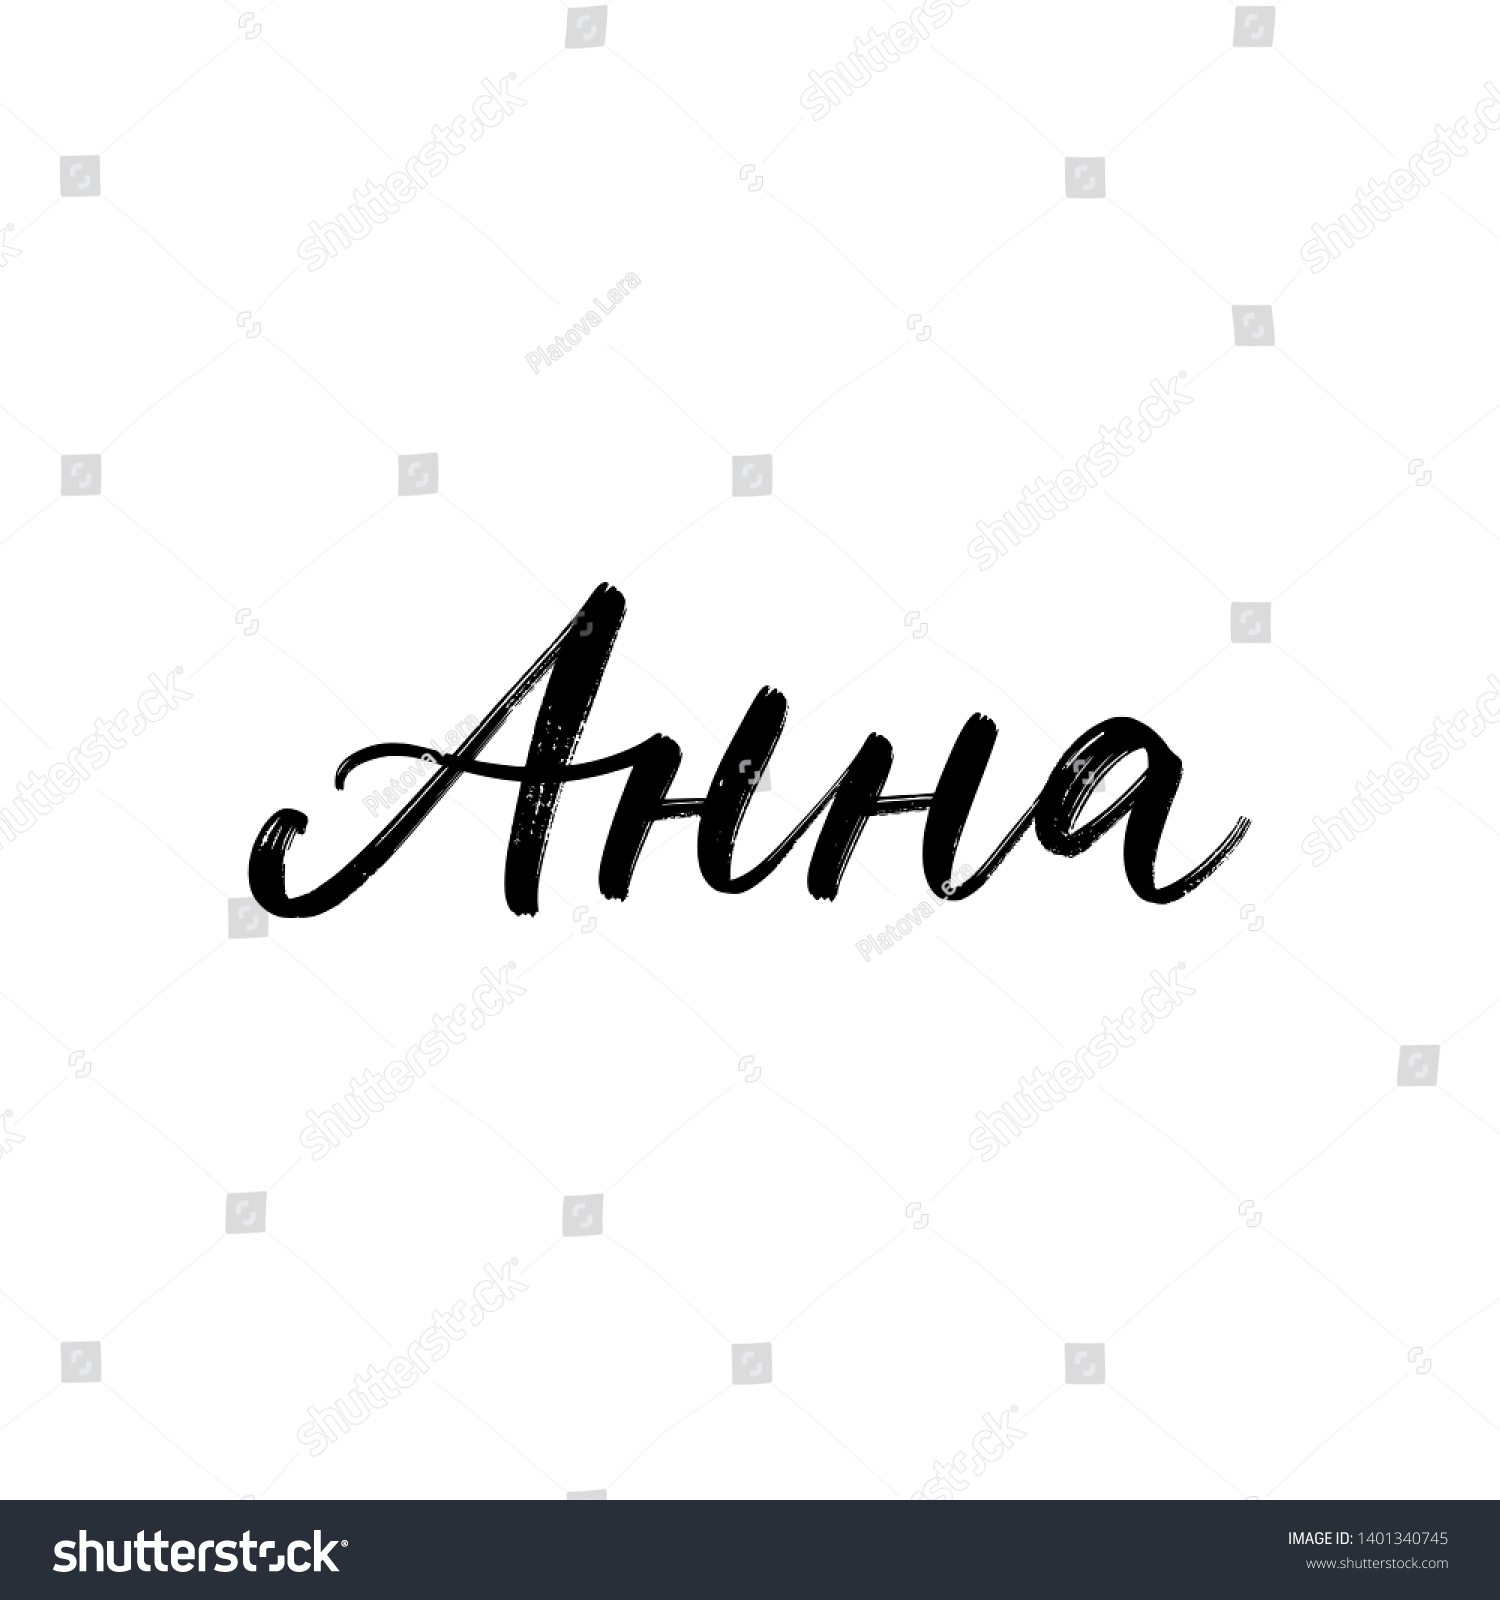 SVG of CYRILLIC WOMAN'S NAME LETTERING TRANSLATION ANNA. VECTOR HAND LETTERING svg